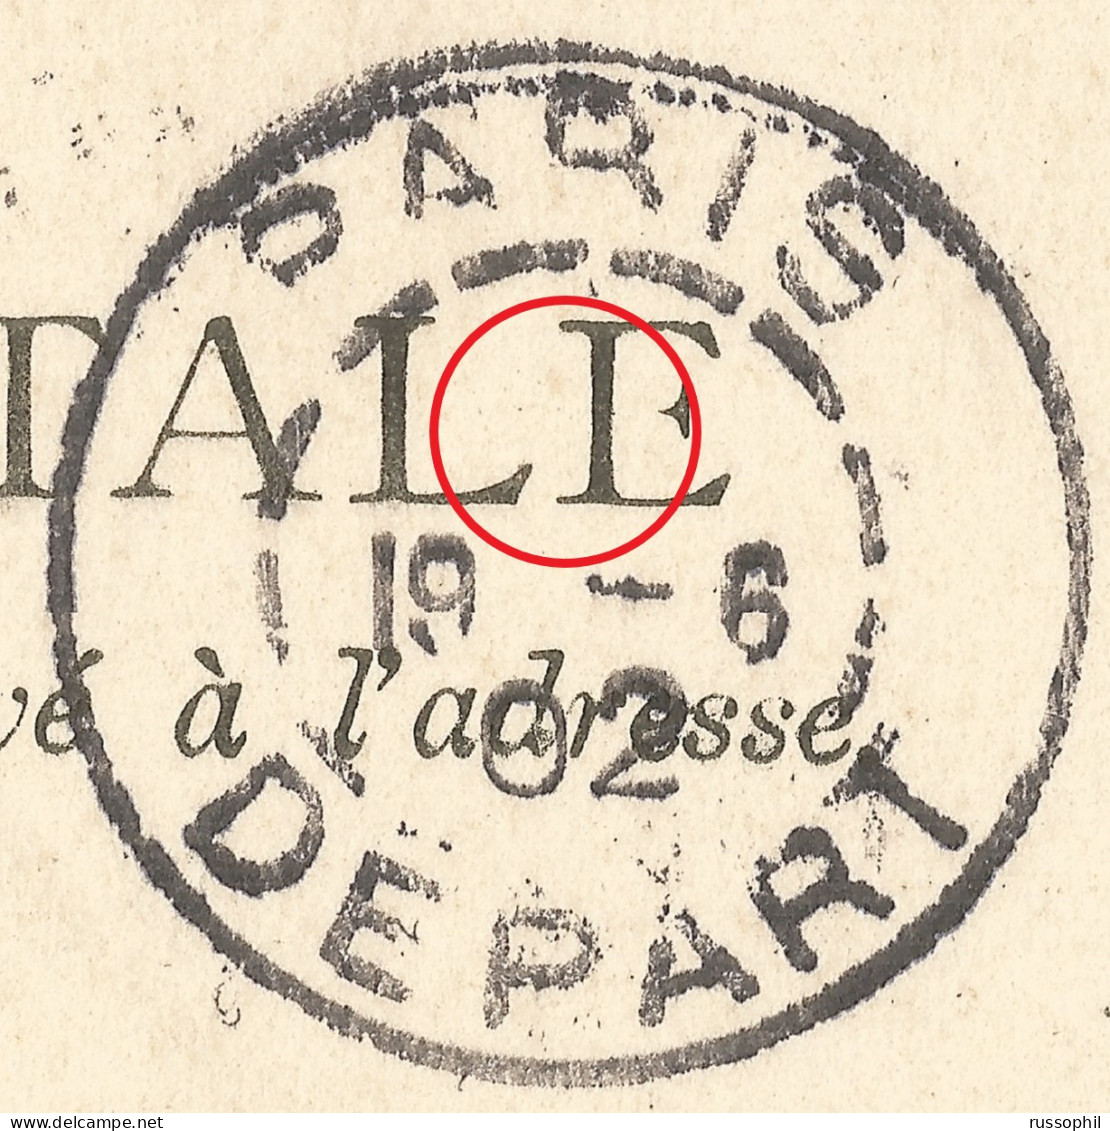 FRANCE - VARIETY &  CURIOSITY - 75 - A3 DEPARTURE CDSs "PARIS DEPART"  ON PC - HOUR MISSING IN DATE BLOCK - 1902 - Covers & Documents